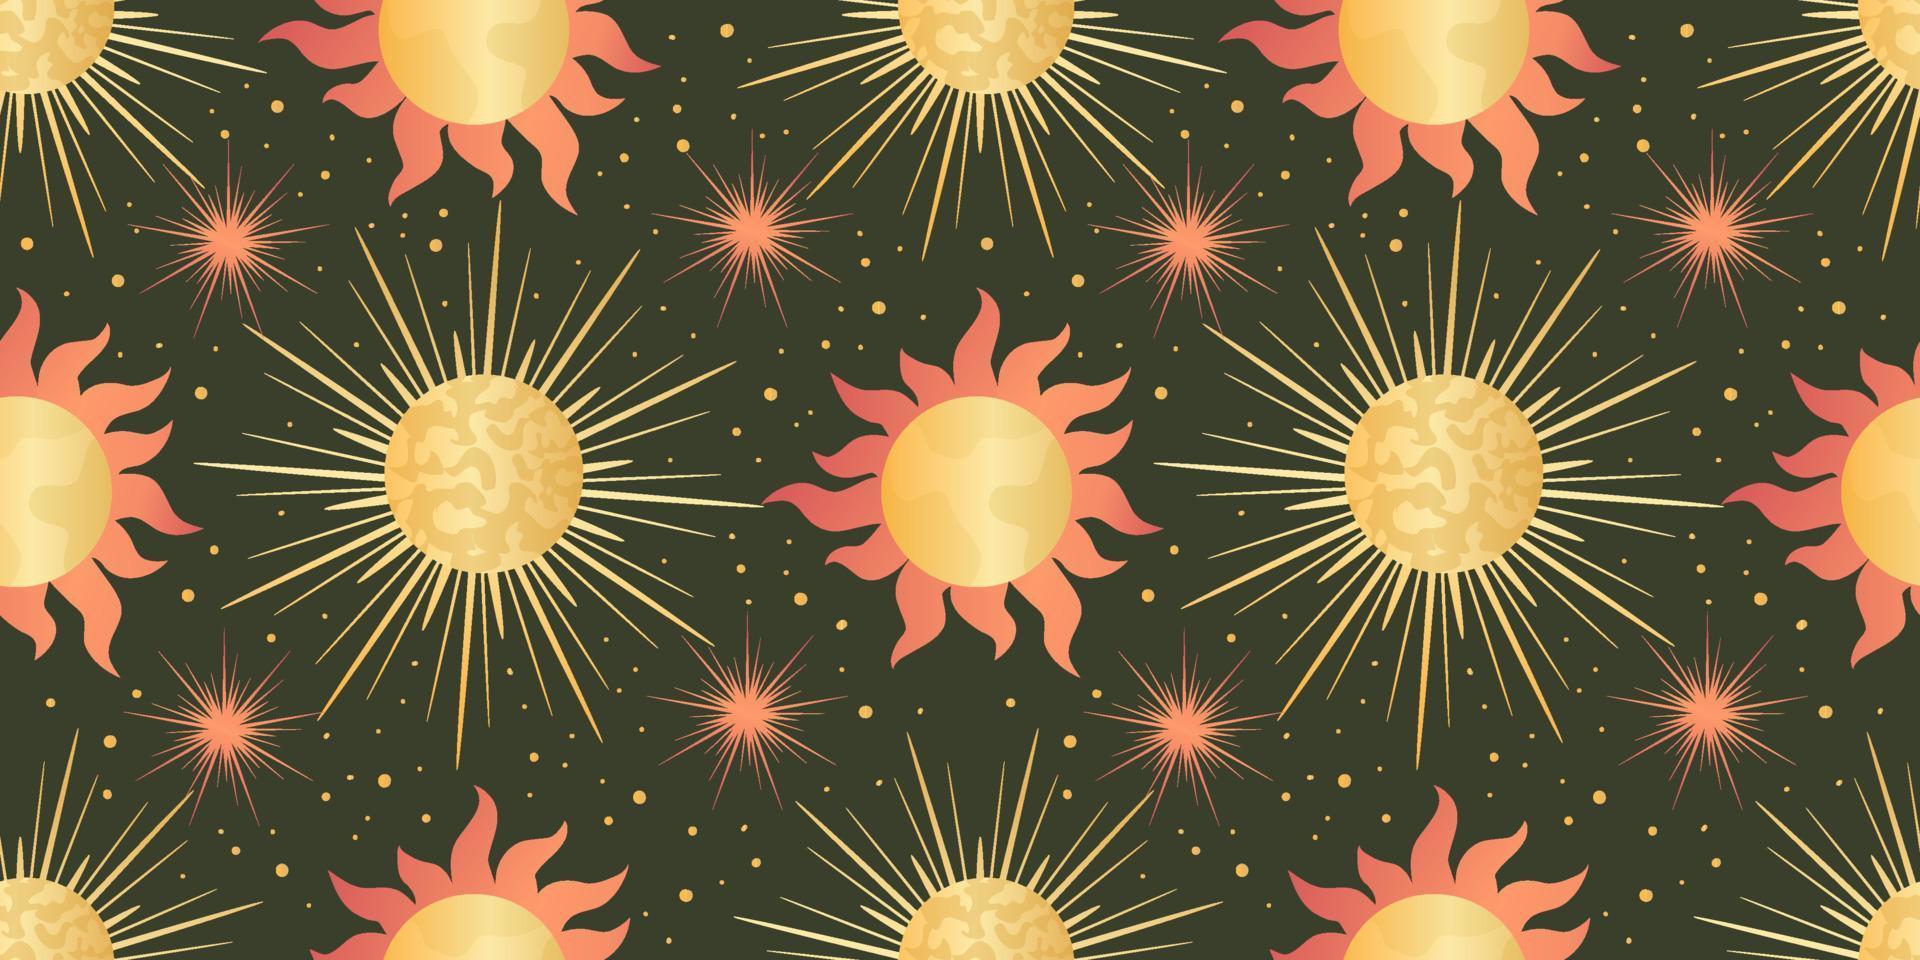 Star celestial seamless pattern with sun. Magical astrology in vintage boho style. Golden sun with rays and stars. Vector illustration